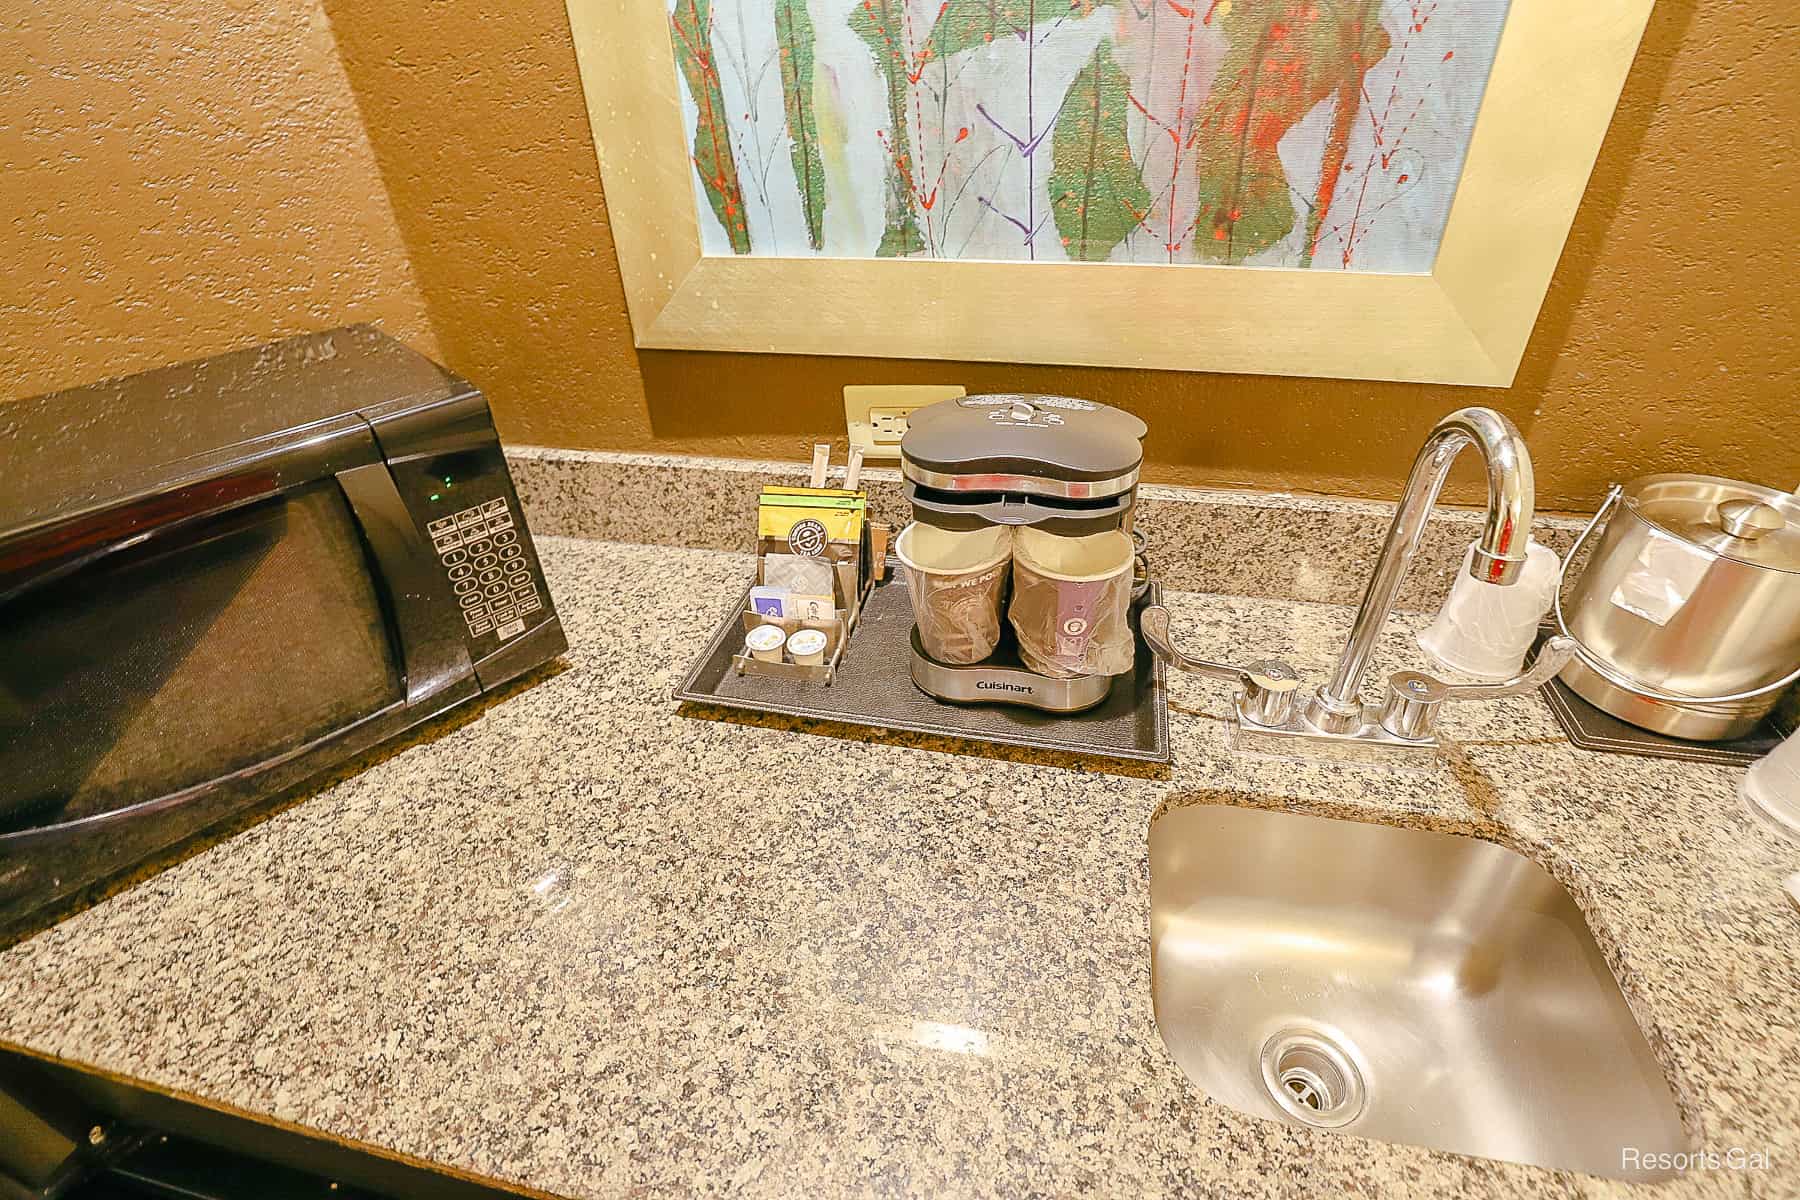 a microwave, an individual cup coffee maker, and a small sink in the room at Hilton Doubletree Disney Springs 